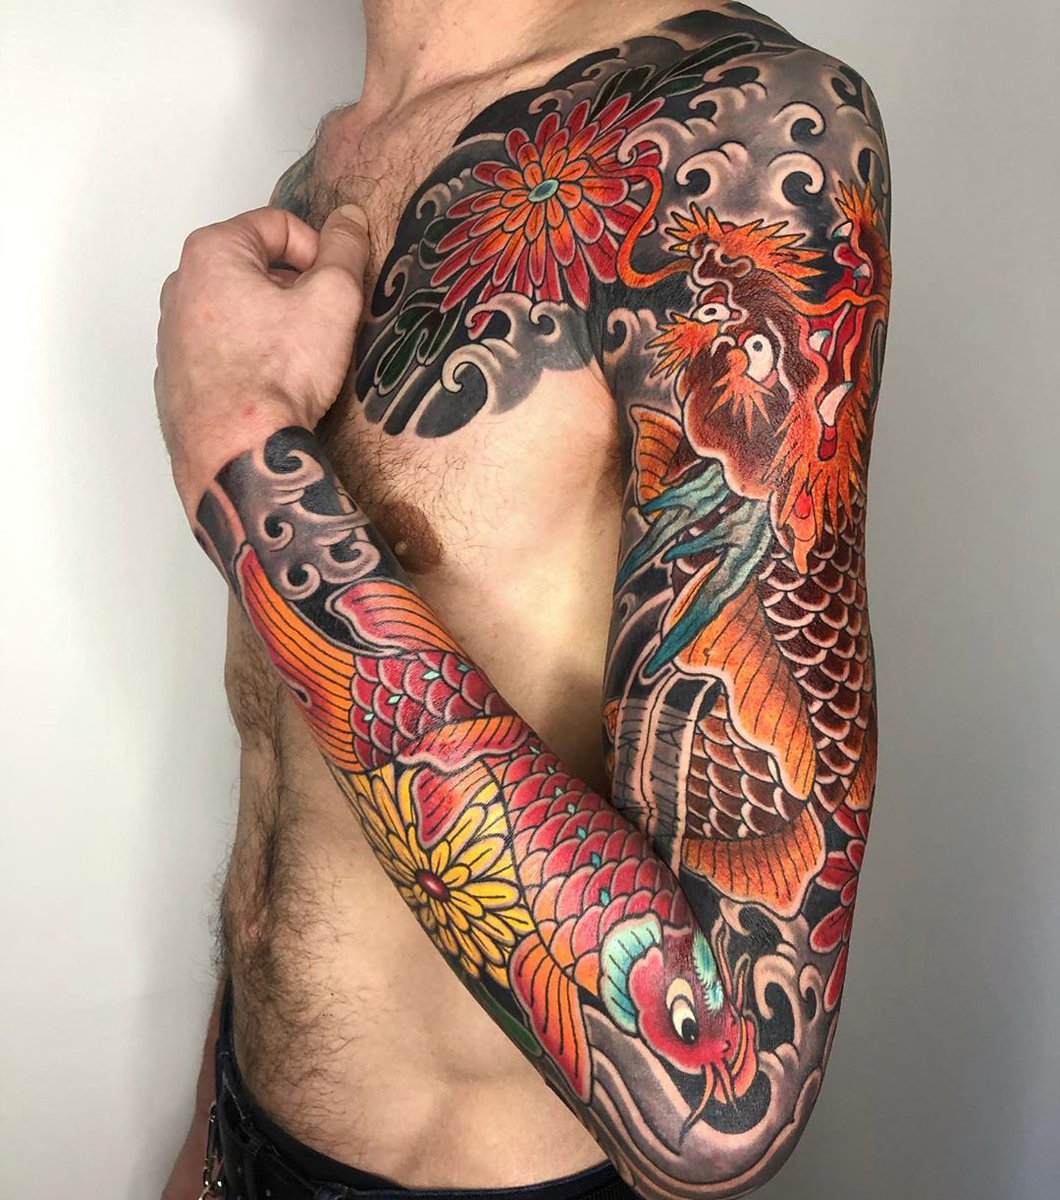 Update More parts of the traditional Japanese sleeve done just need the  tiger and dragon colored All work done by Andrew at Pyramid Tattoo in  Boise ID  rtattoos